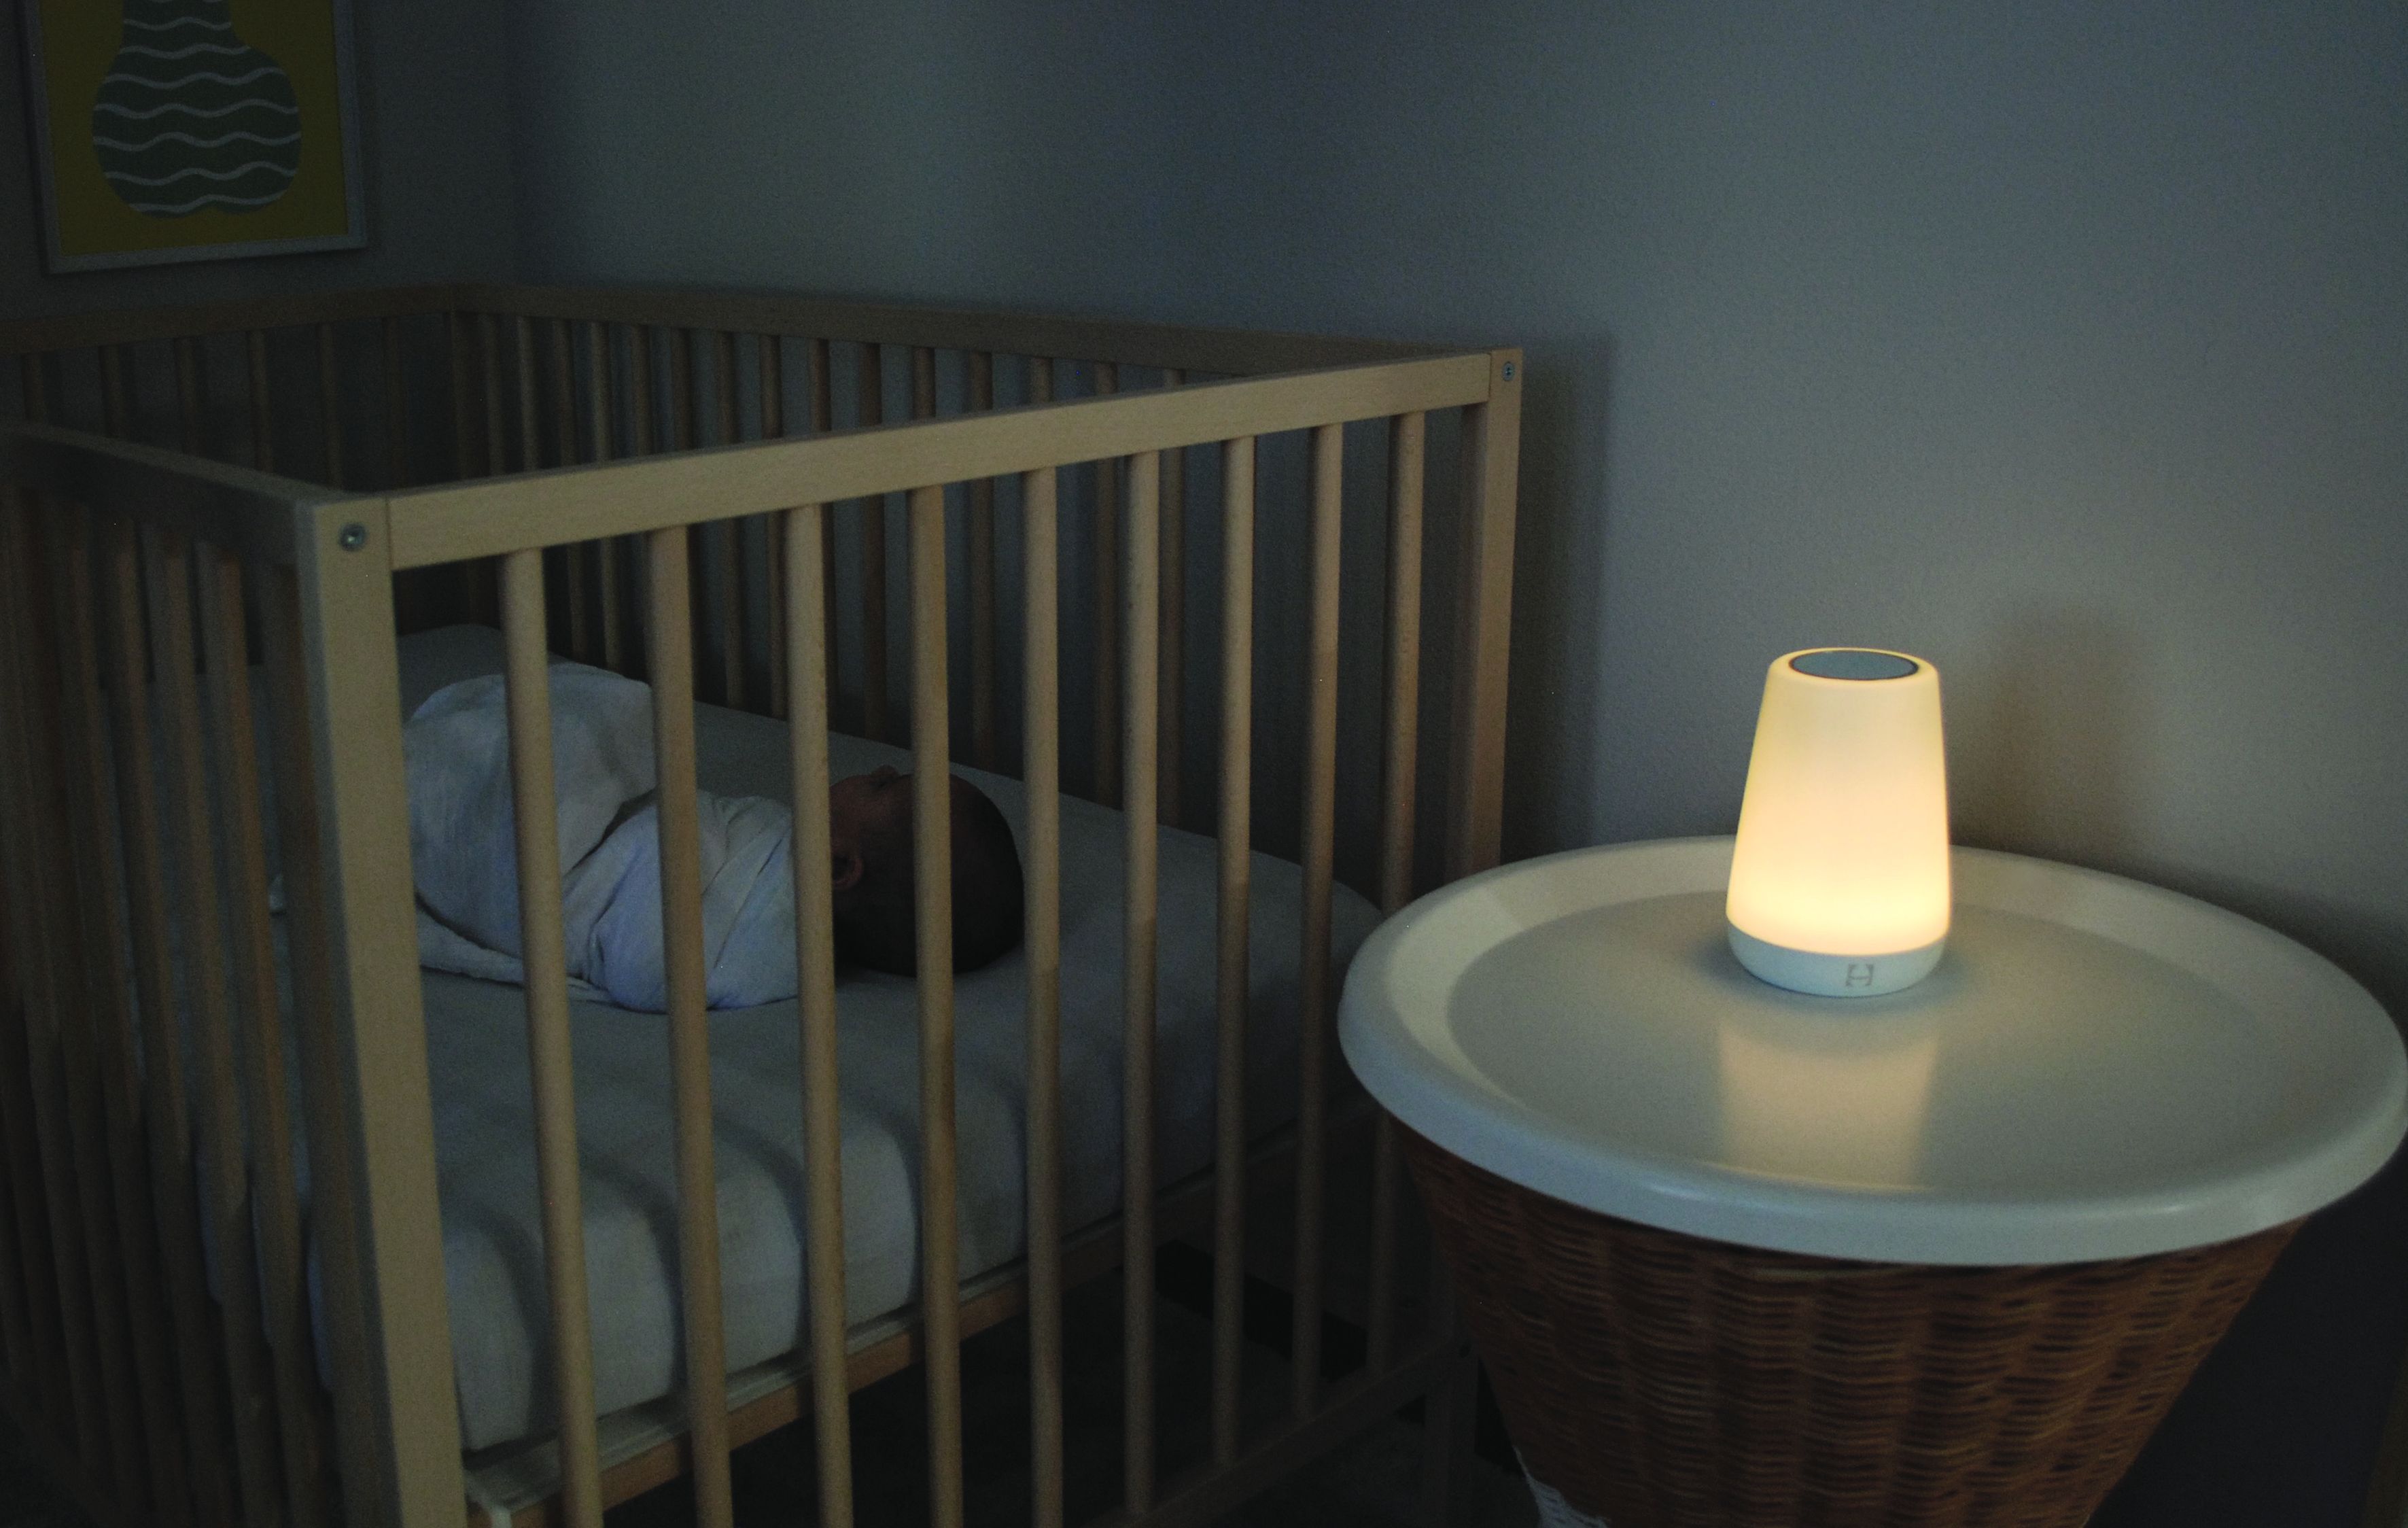 Hatch Rest Baby Night Light, Sound Machine & Time-to-Rise - image 2 of 10